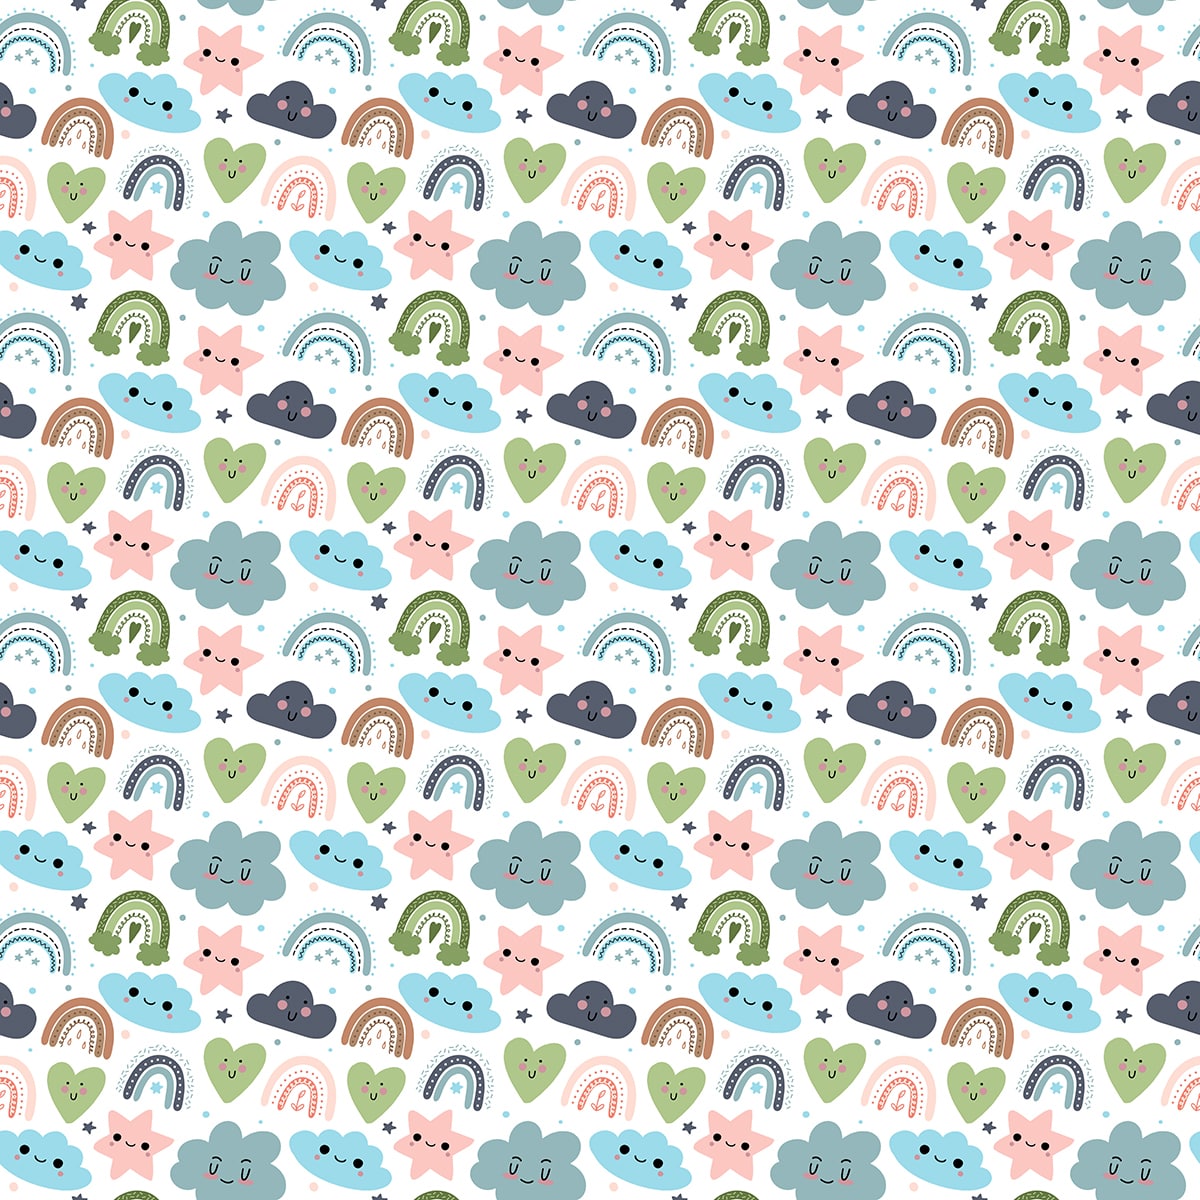 A pattern of cartoon characters